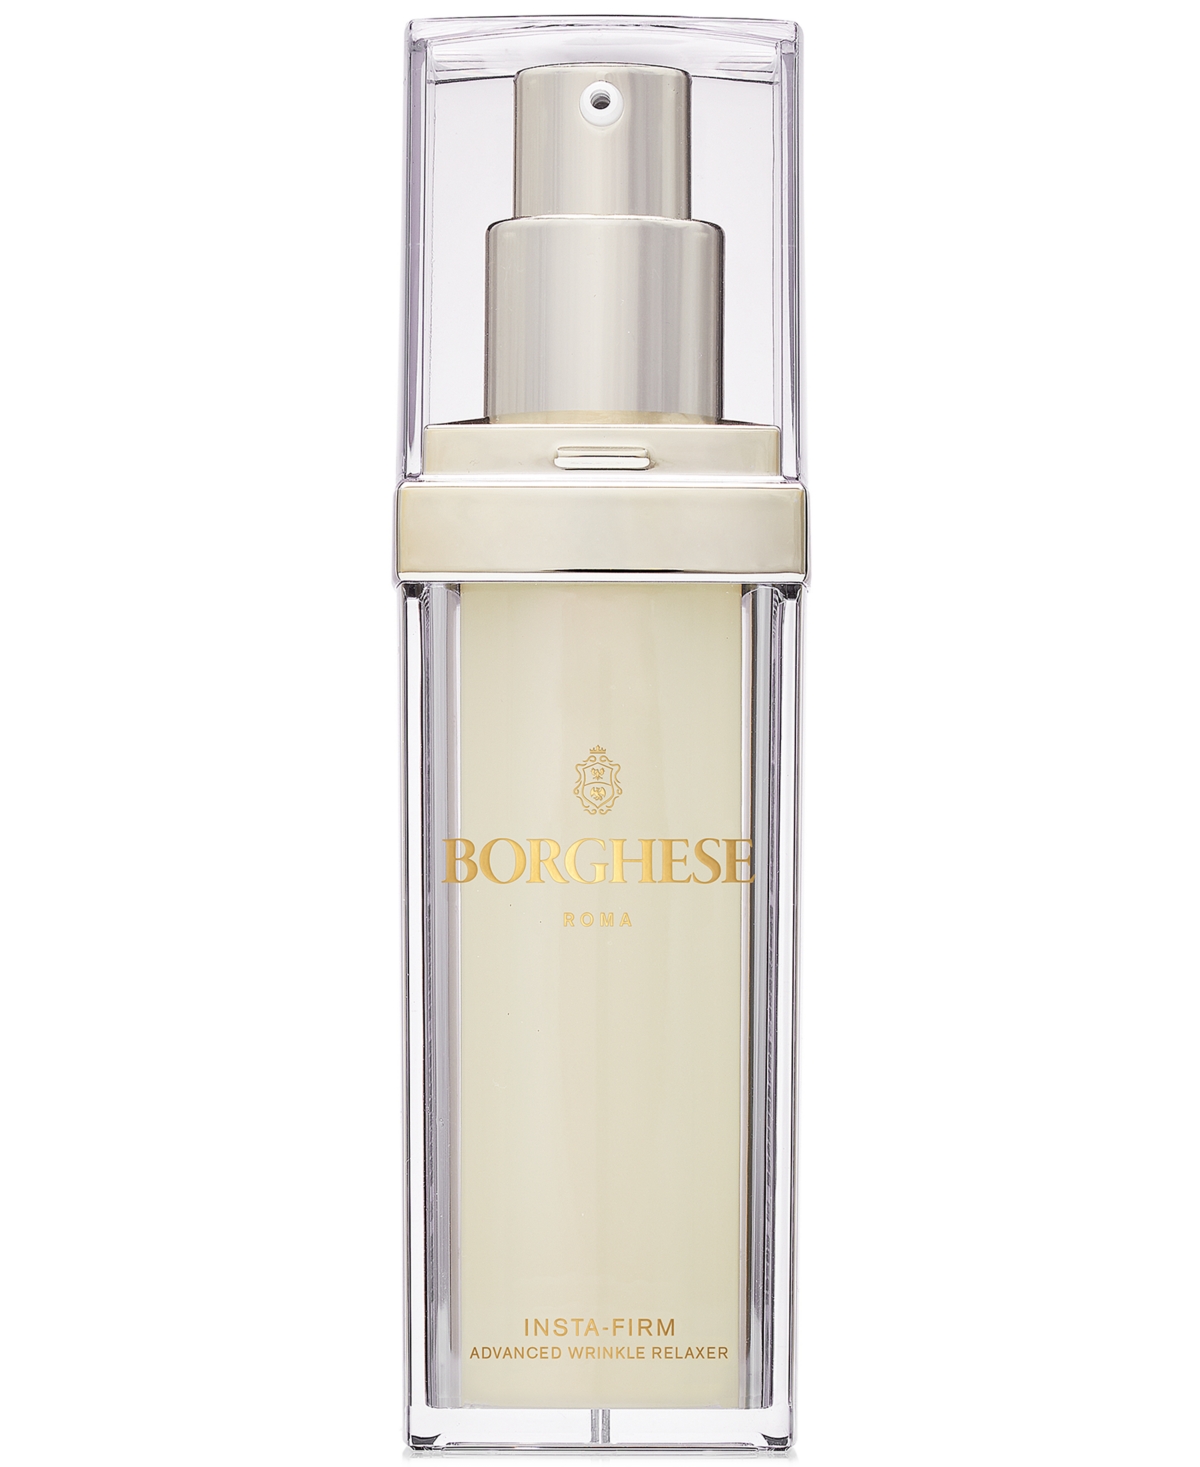 Borghese Insta-firm Advanced Wrinkle Relaxer, 1 Oz.